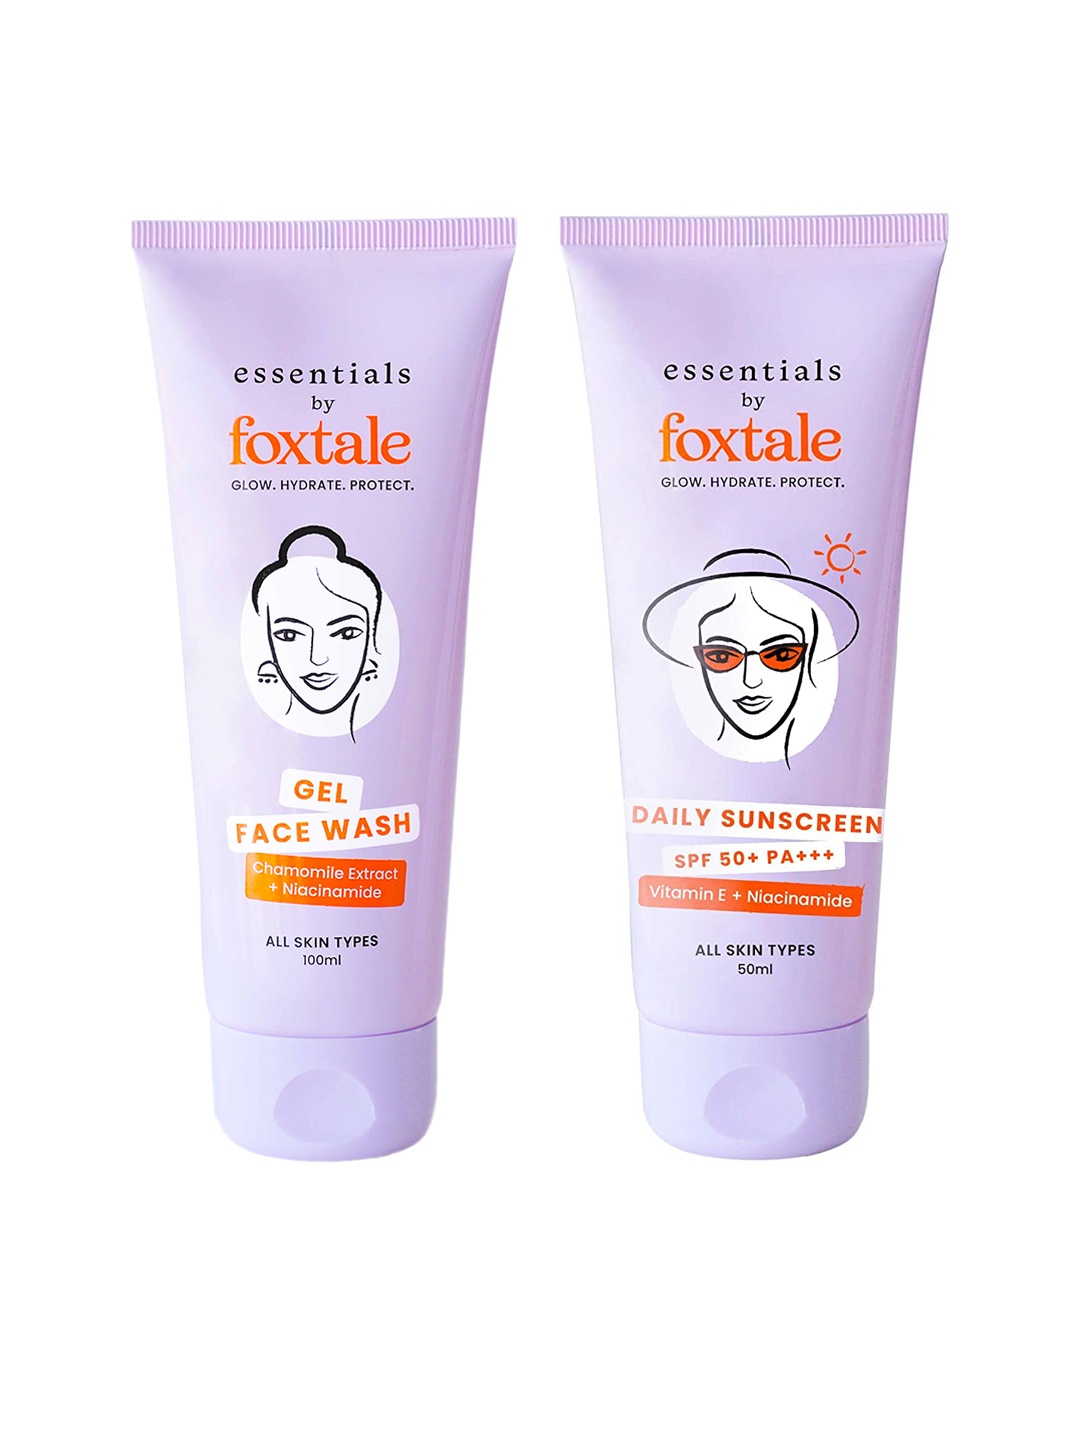 

FoxTale Set of Gel Face Wash + Daily Sunscreen with SPF 50 PA+++, Lavender